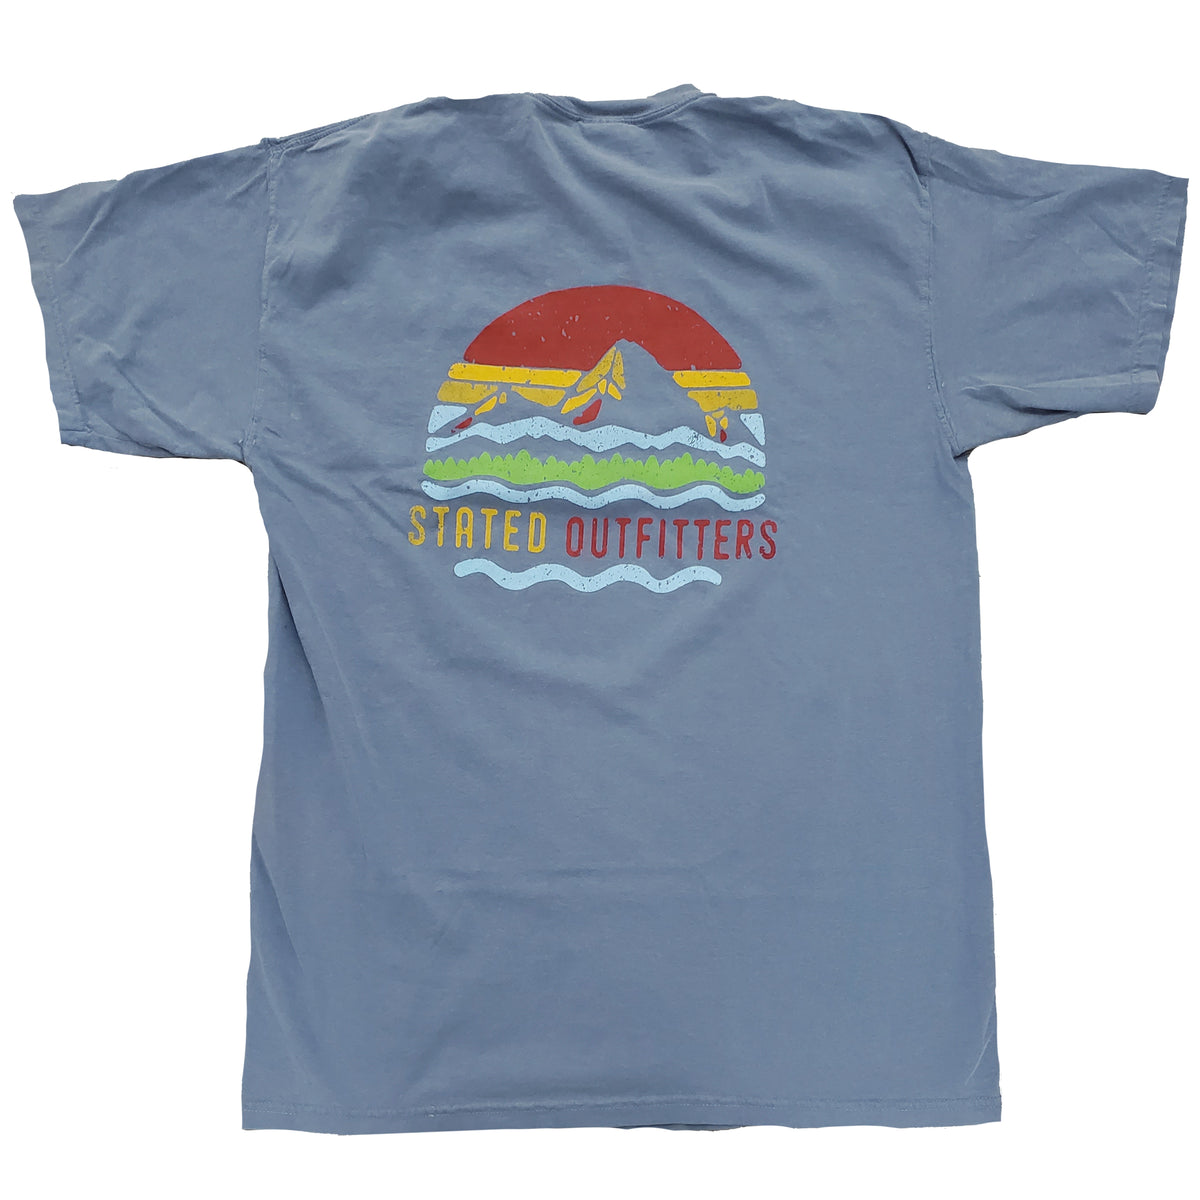 Stated Outfitters Circle Mountain CC Tee